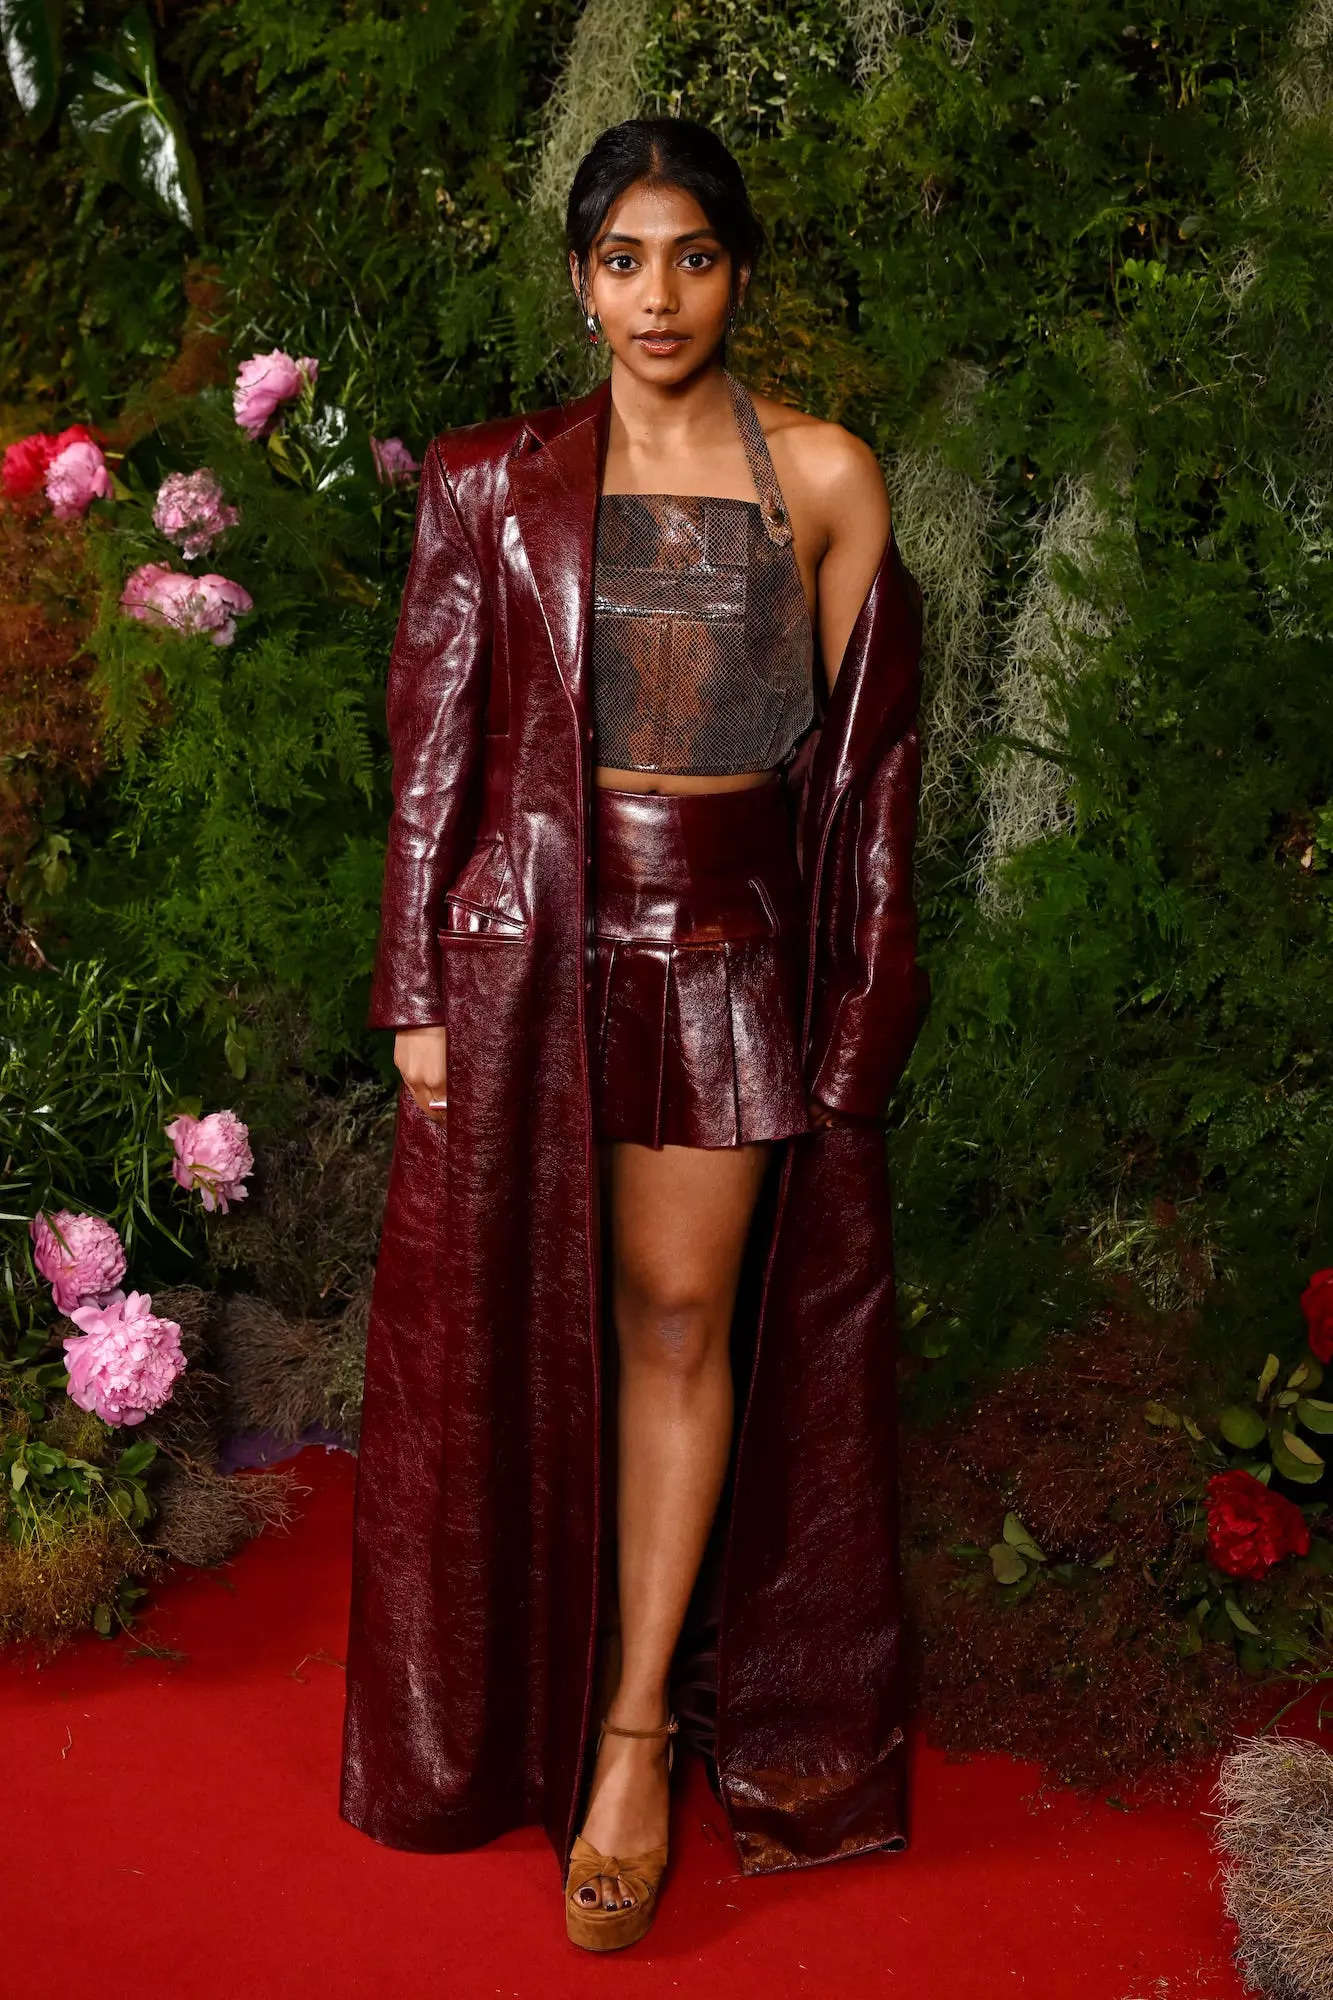 Charithra Chandran attends a Vogue and Netflix event in a look styled by Holly White.